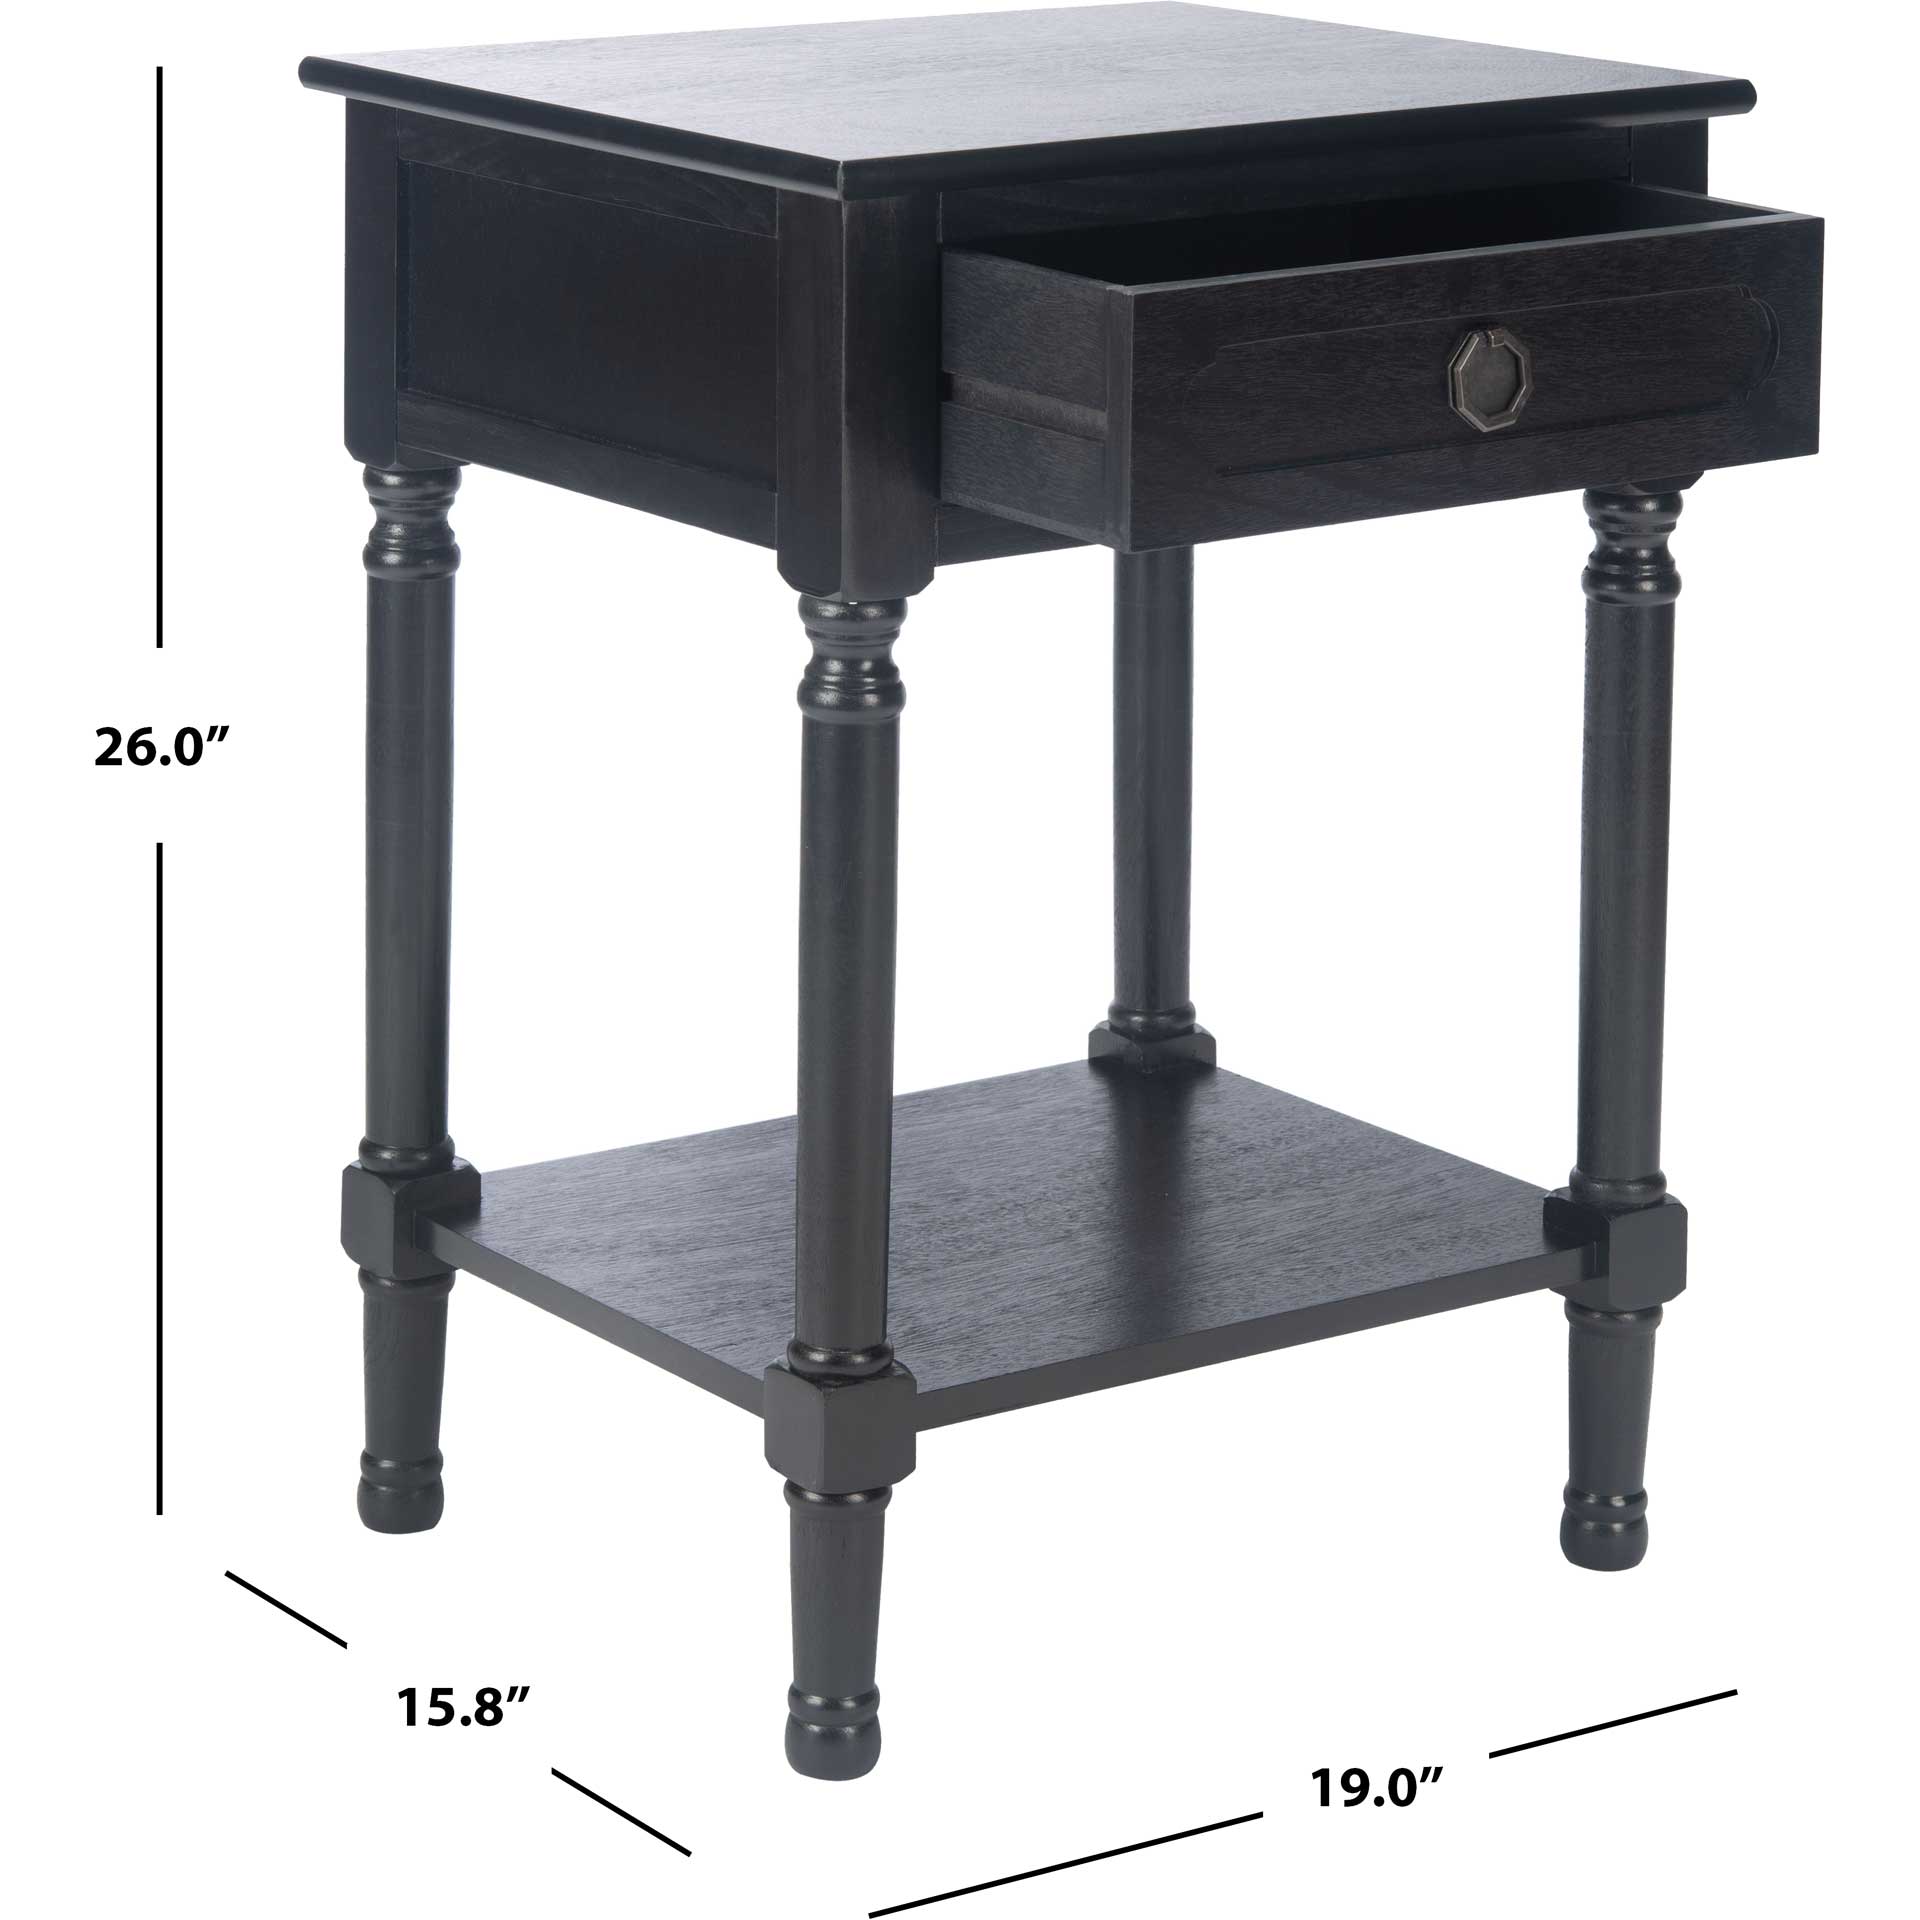 Alessa 1 Drawer Accent Table Black